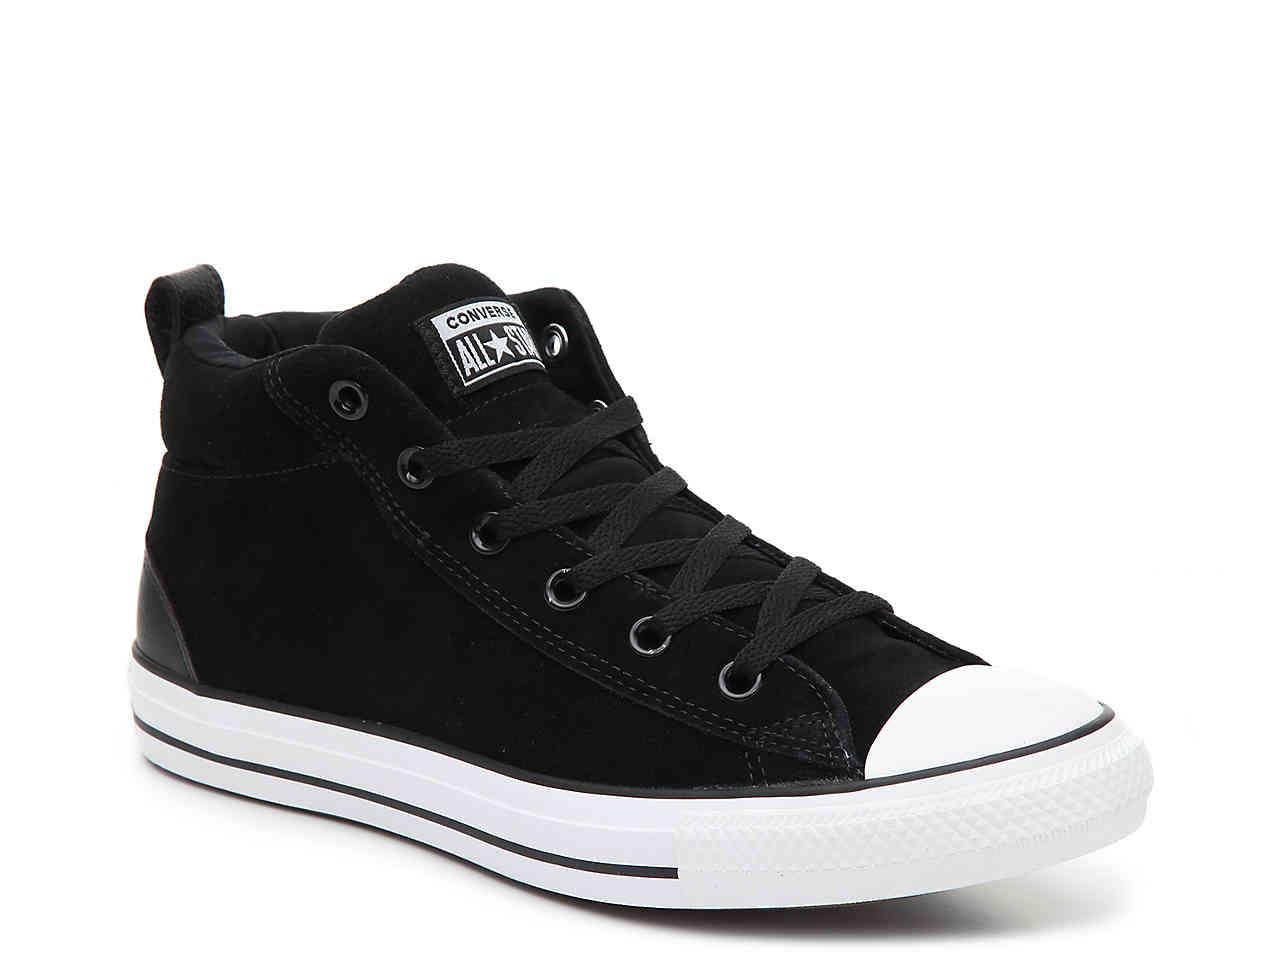 Converse Suede Chuck Taylor All Star Street Mid-top Sneaker in Black